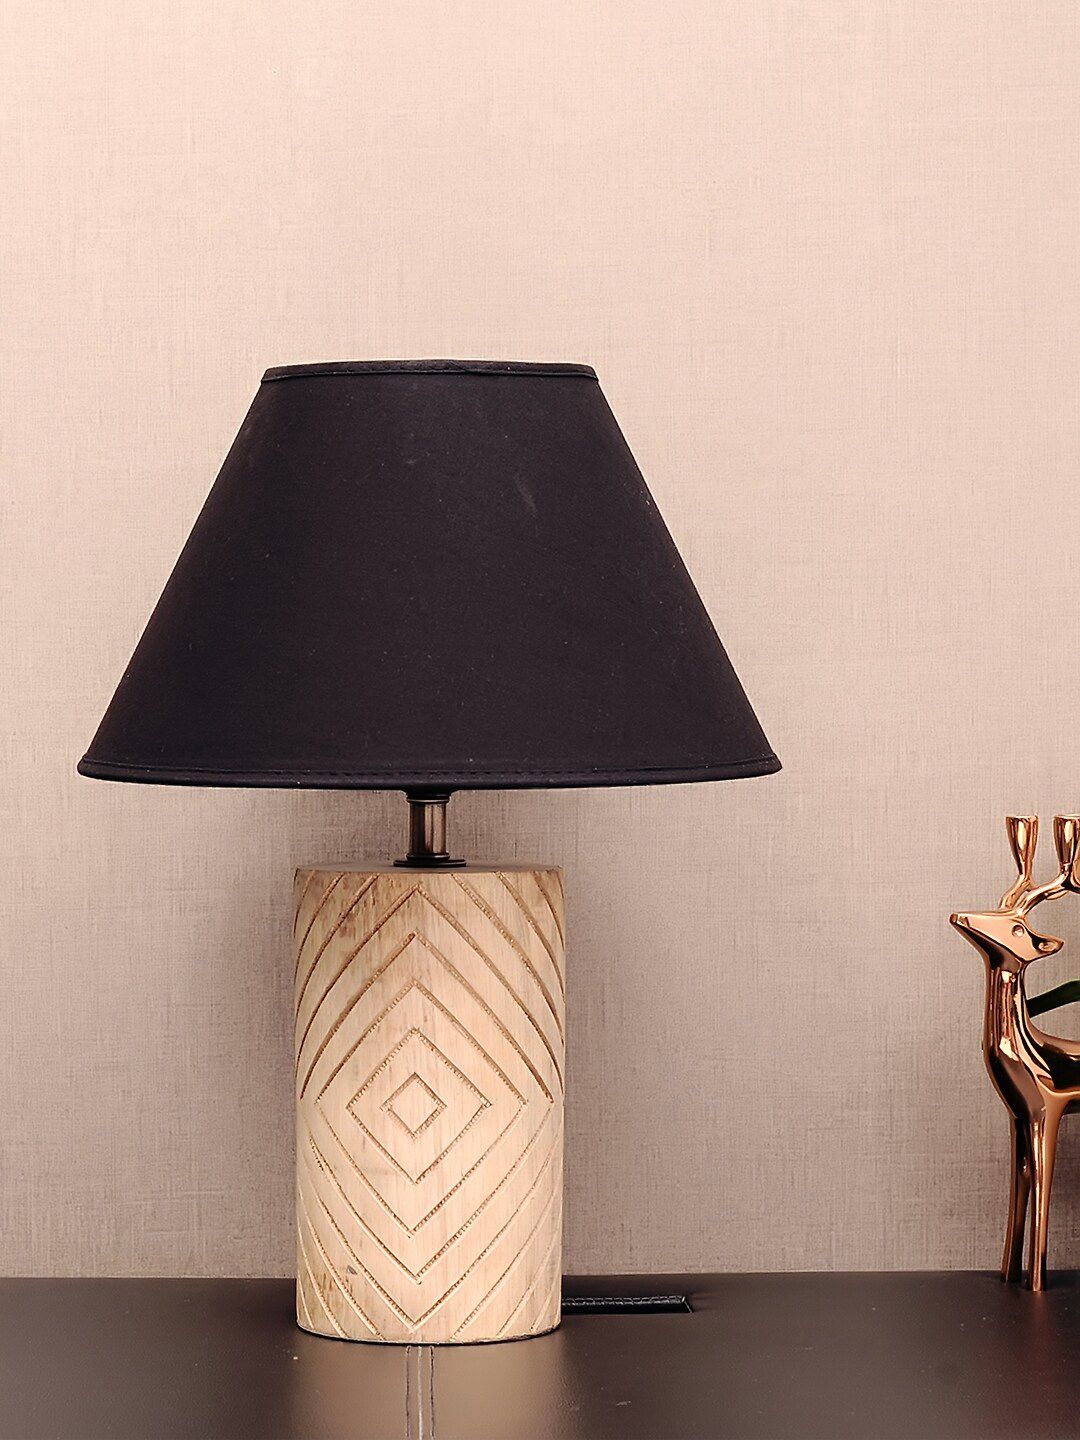 THE LIGHT STORE Brown Self-Design Table Lamp With Black Shade Price in India